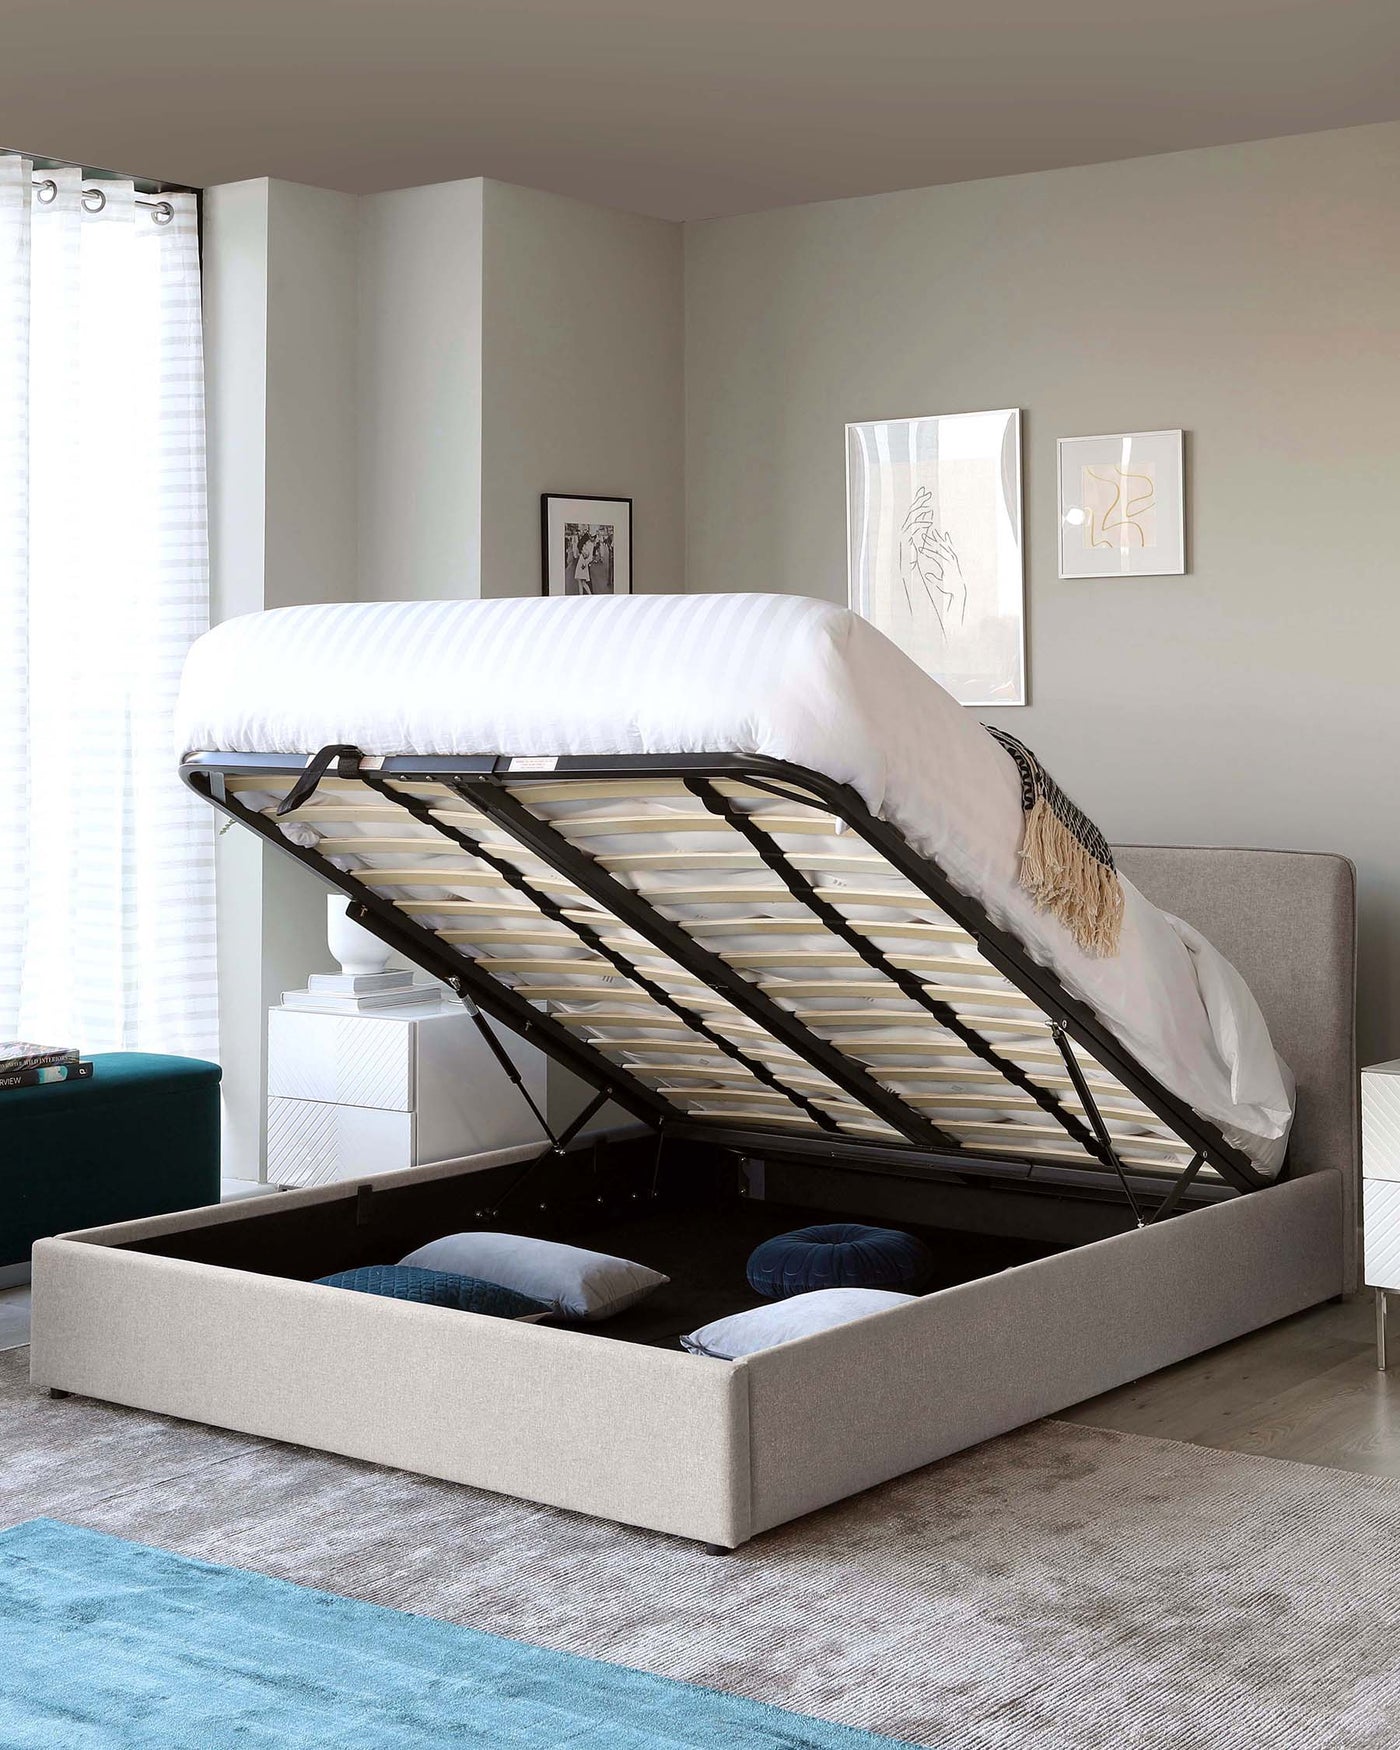 Modern upholstered storage bed with a lifting frame, showcasing a spacious under-bed storage compartment. The bed features a light grey fabric finish, a cushioned headboard, and a slatted base for mattress support.